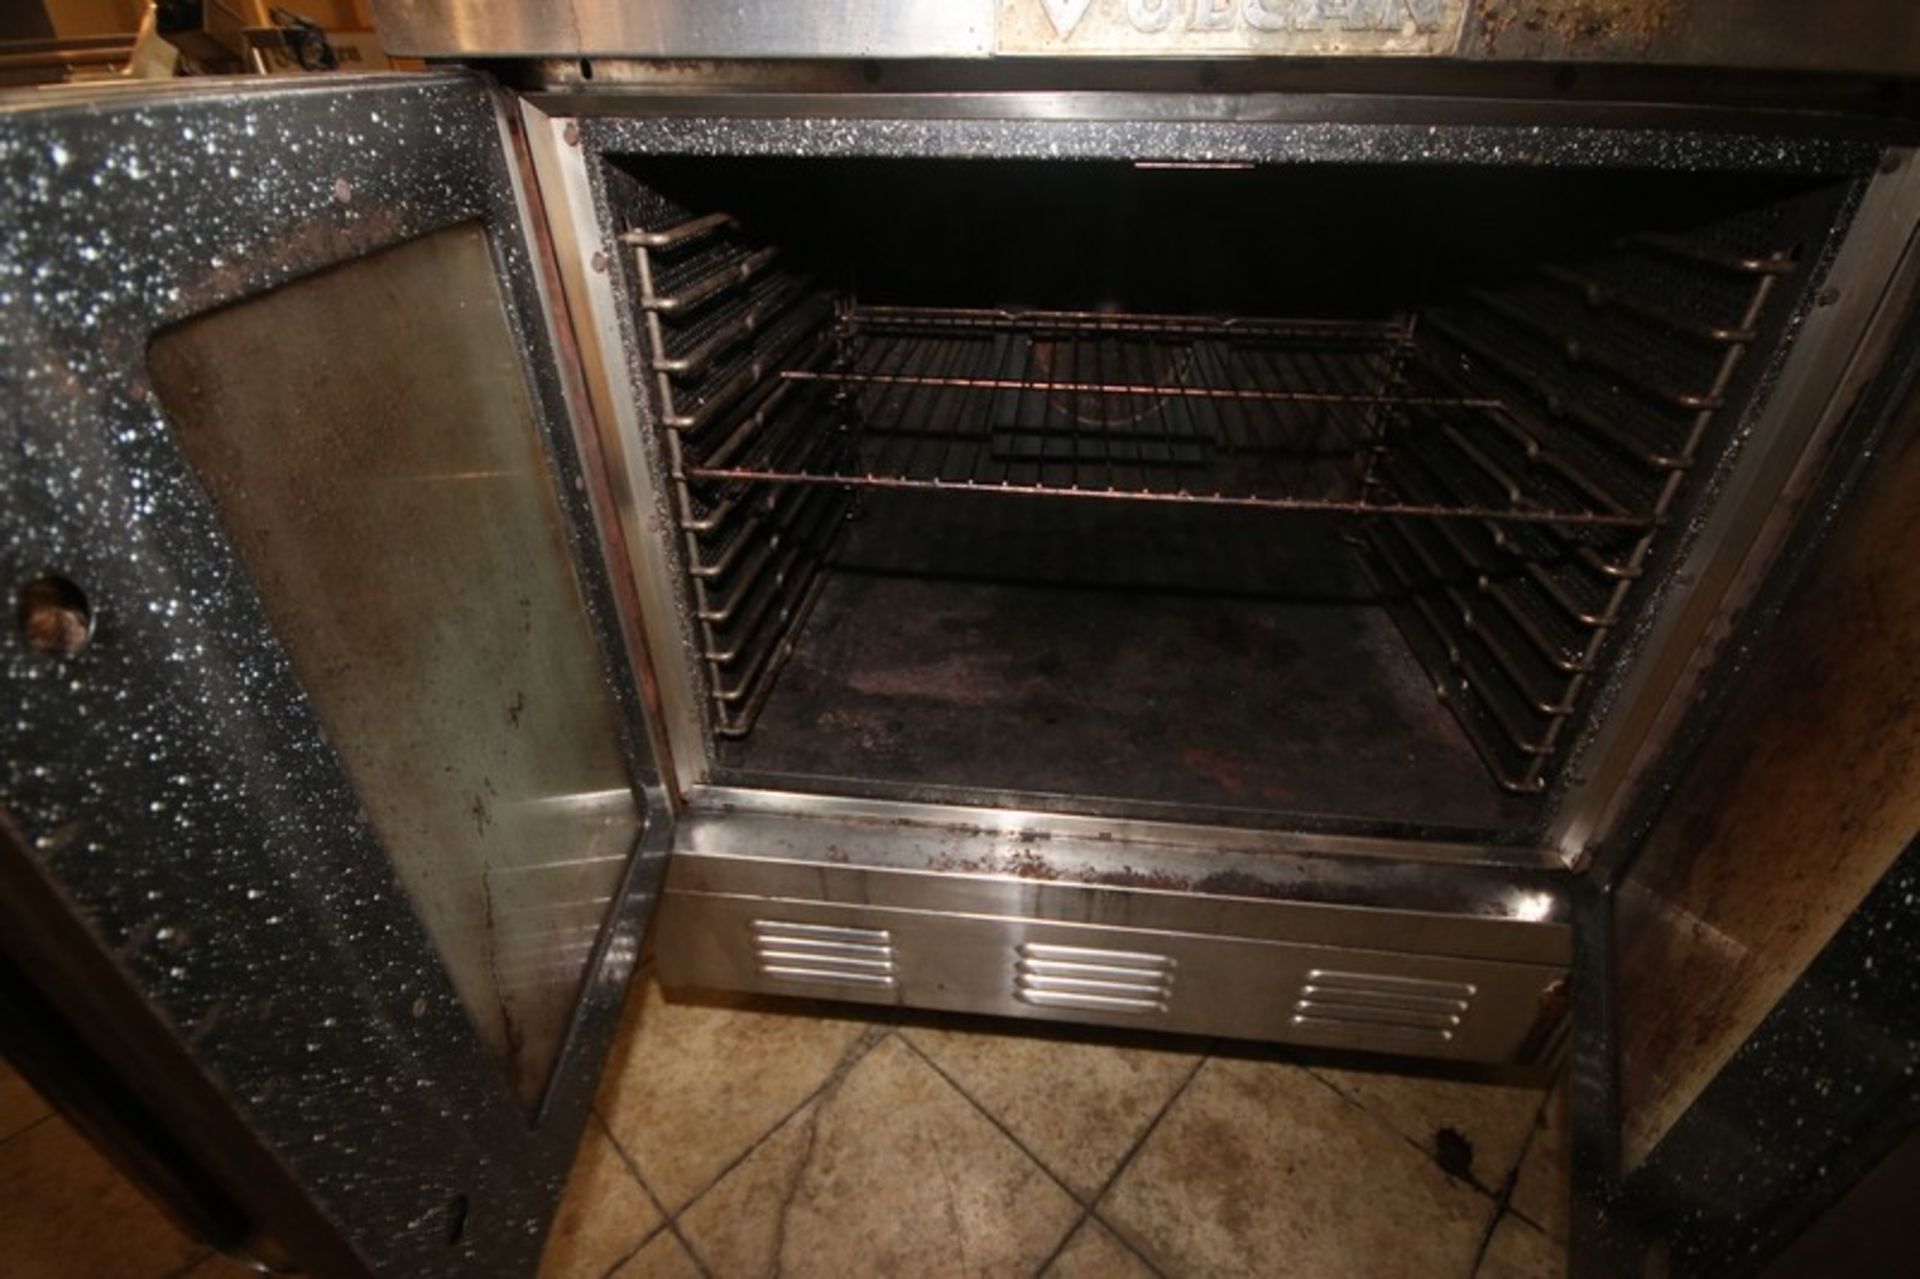 Vulcan & Snorkel S/S Double Decker Ovens, Overall Dims.: Aprox. 40-1/2" L x 37" W x 75" H, Mounted - Image 4 of 5